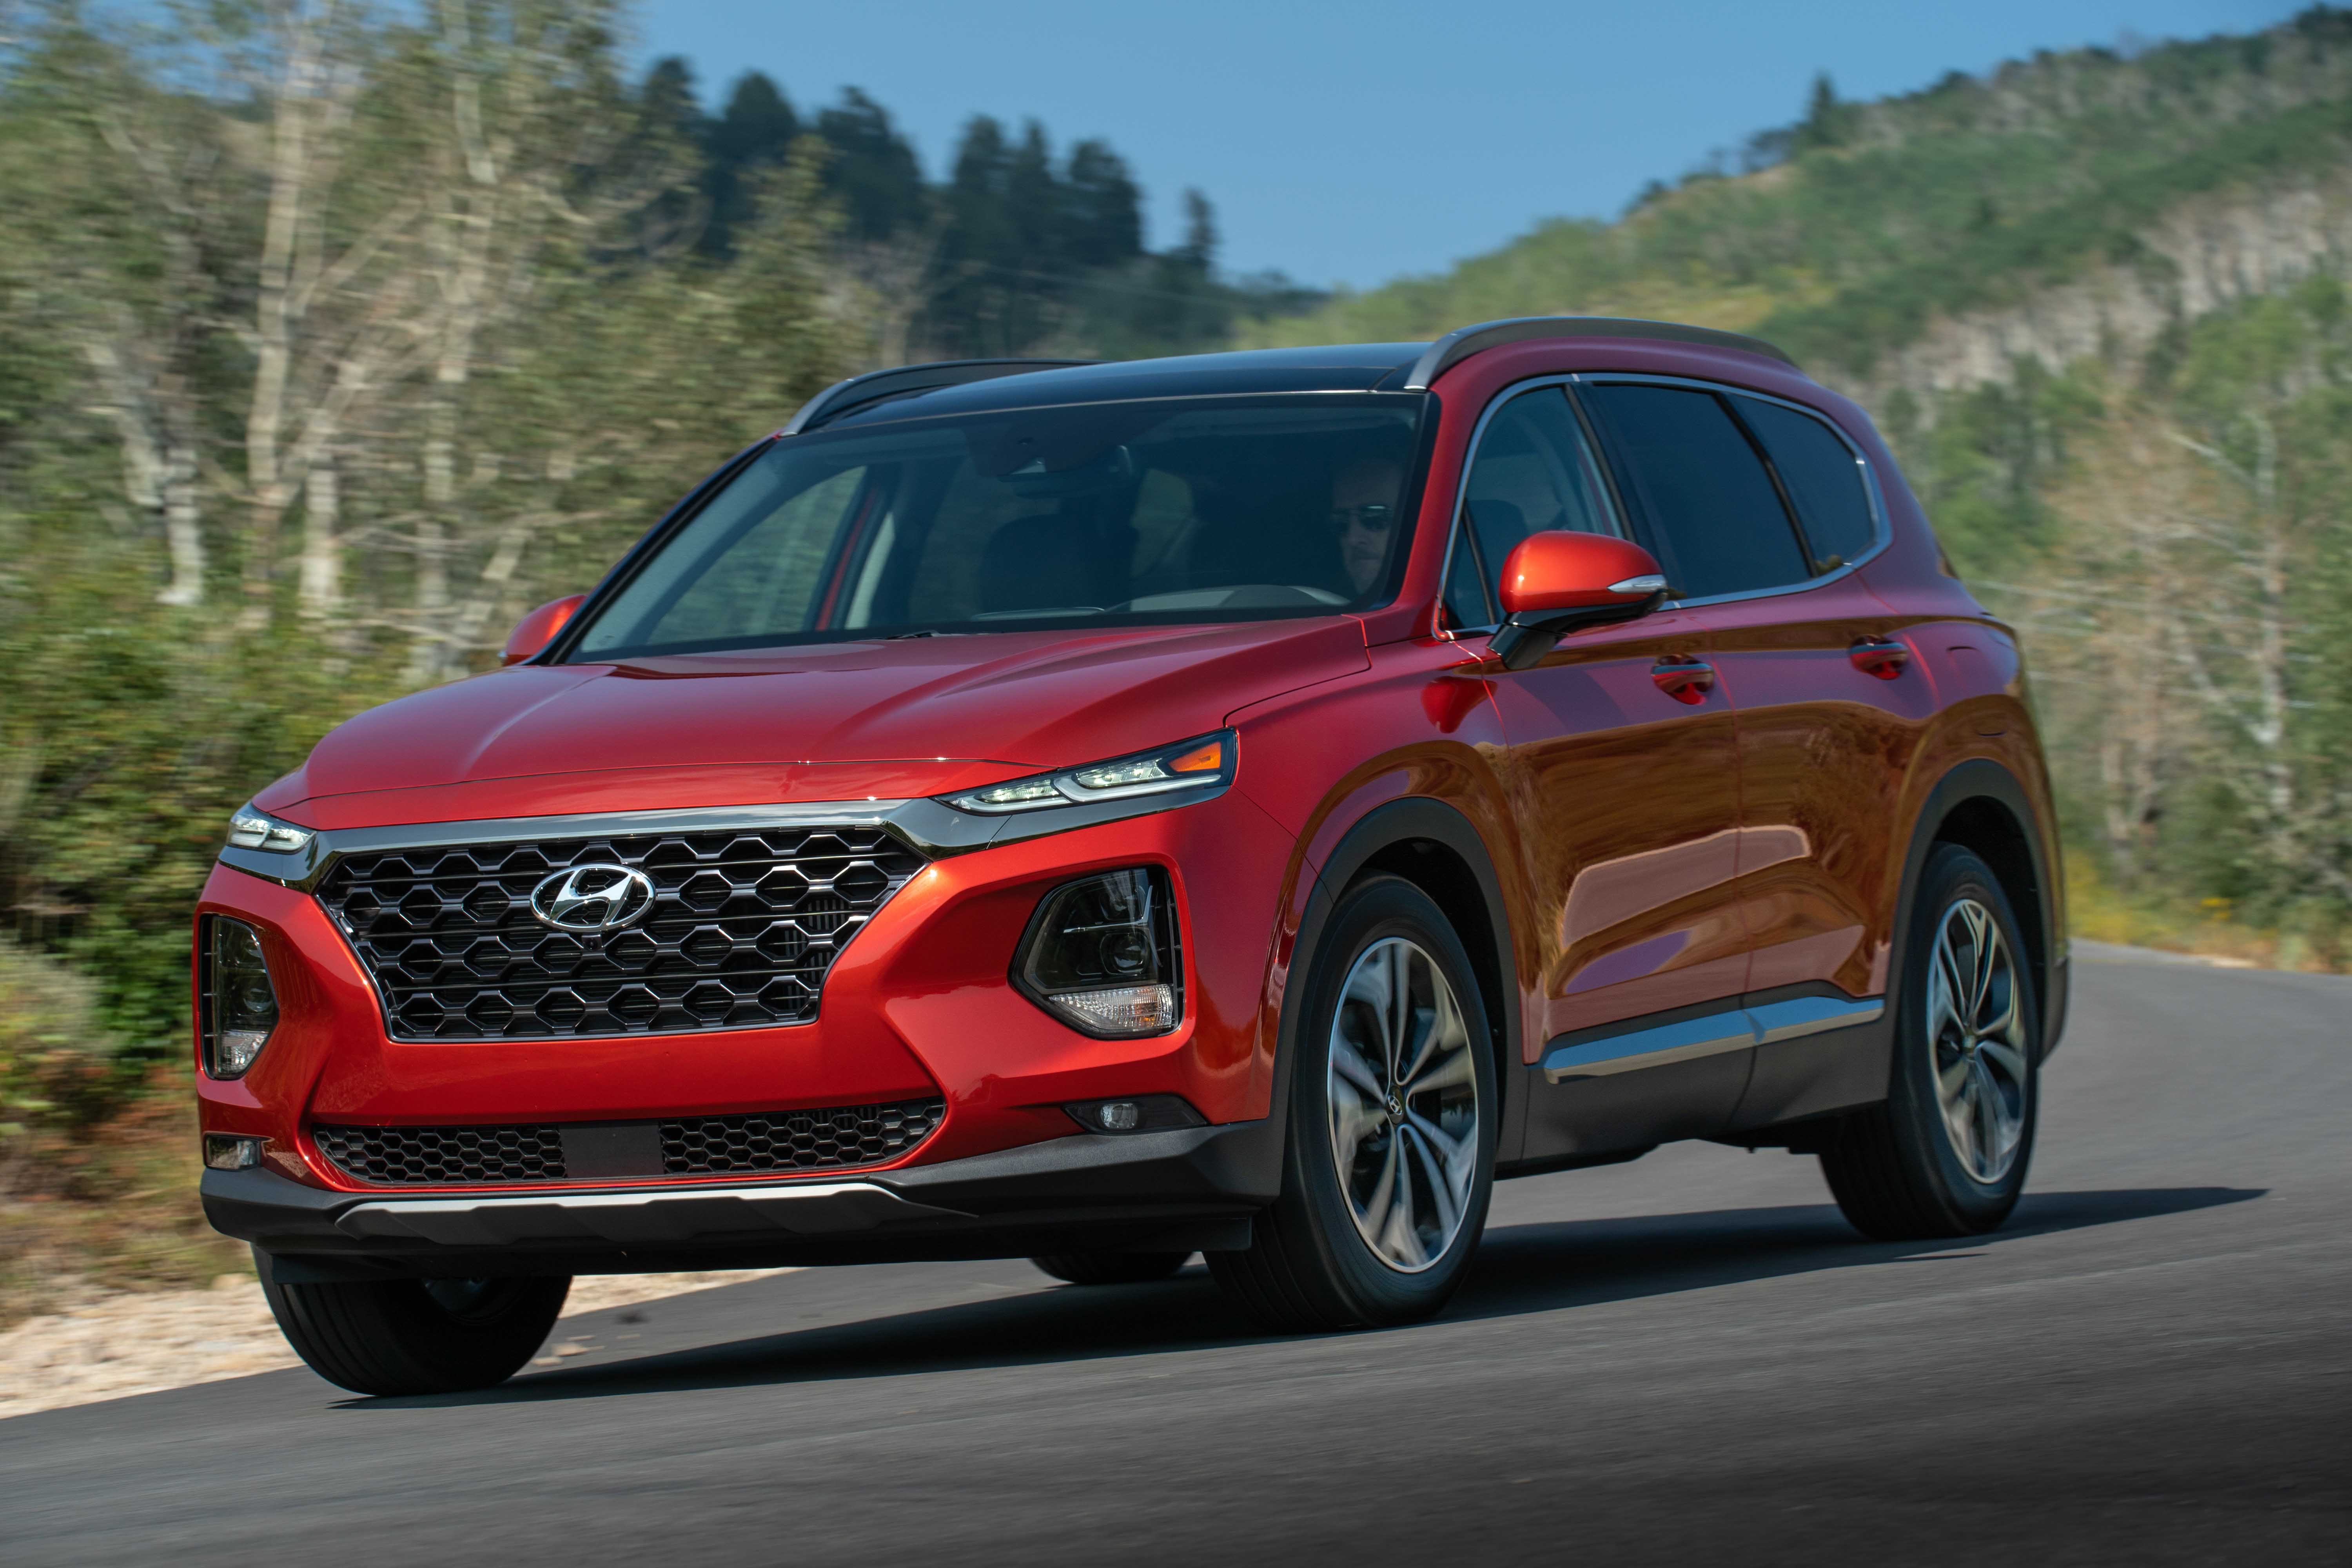 Hyundai Santa Fe Named Most Dependable Mid-Size SUV by J.D. Power